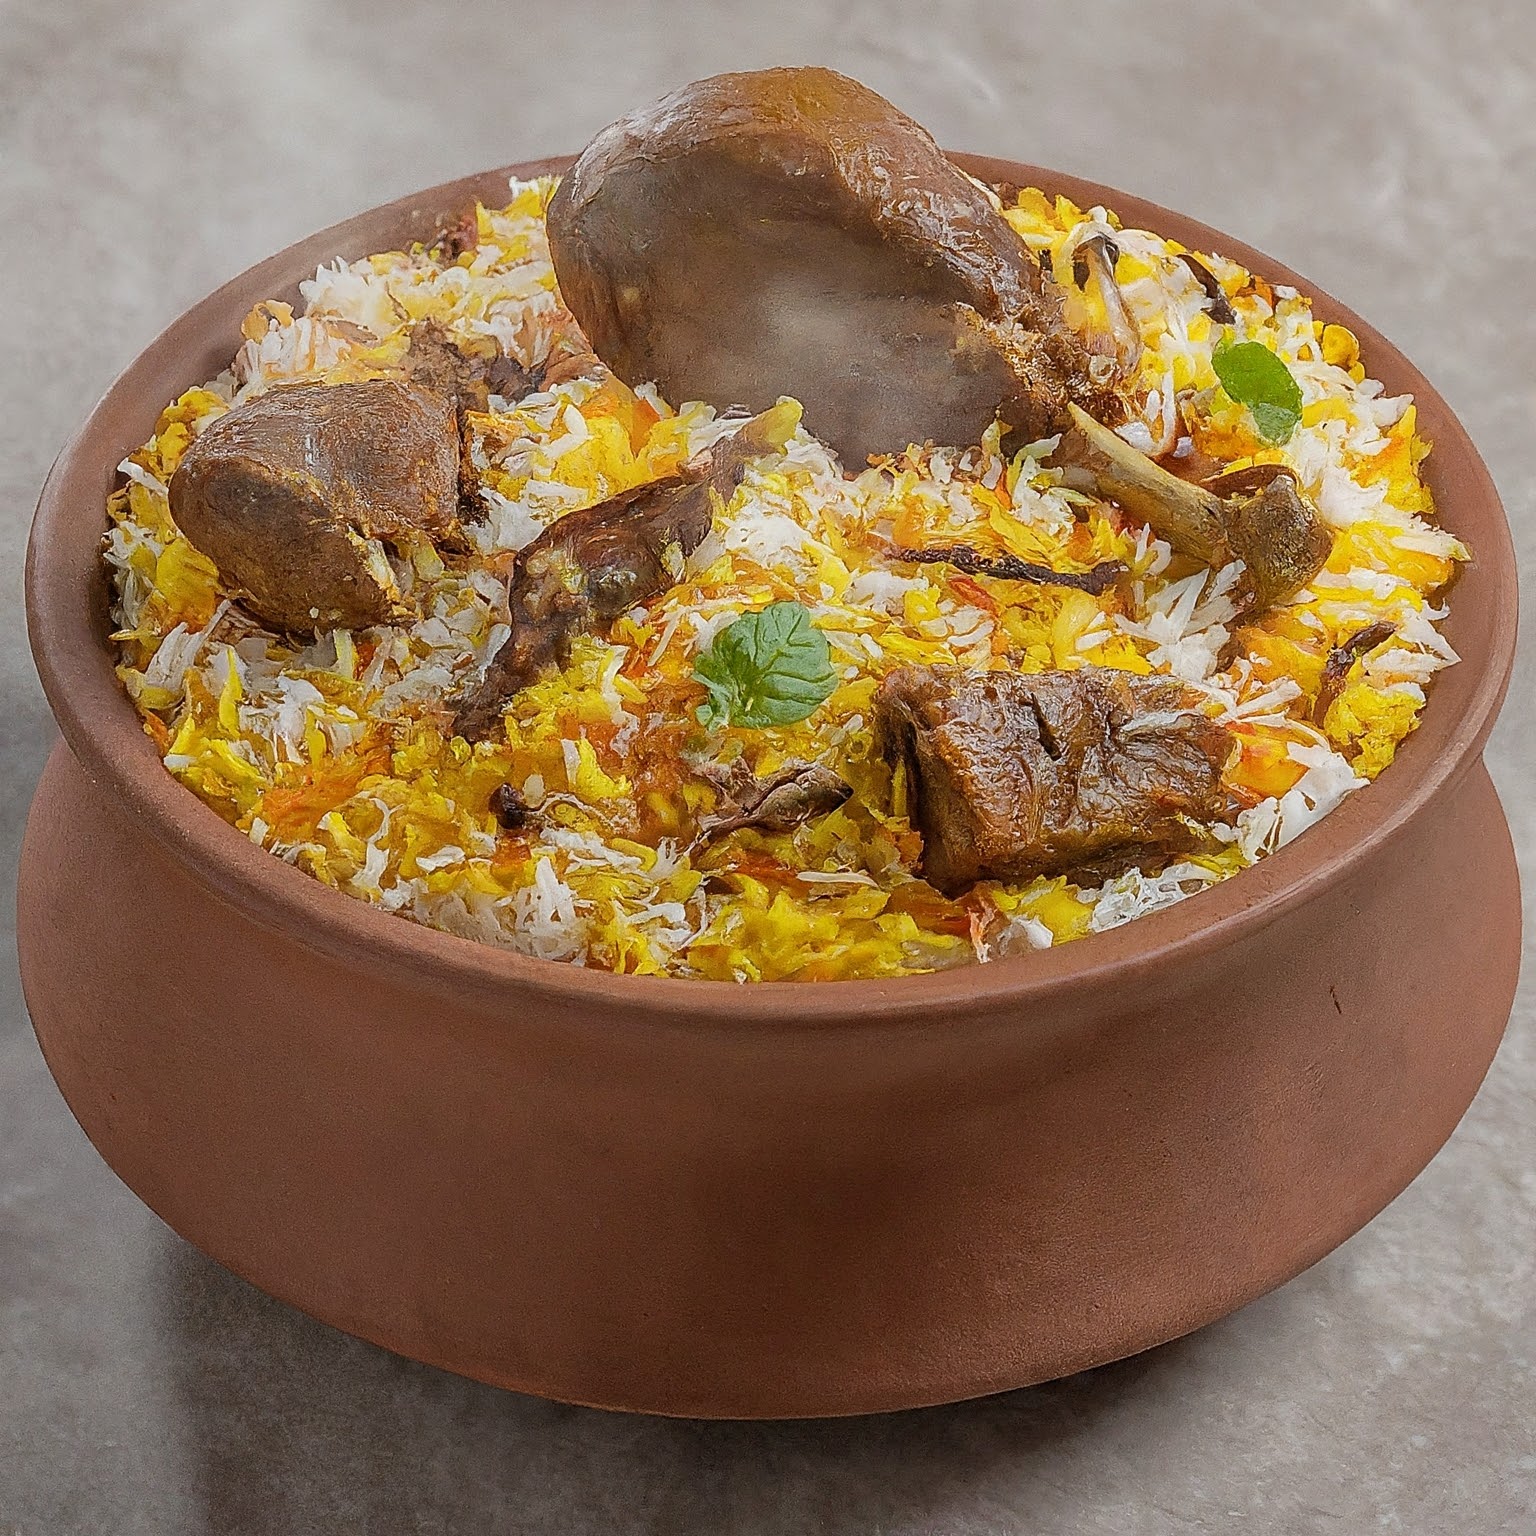 A delicious and colourful biryani dish with rice, chicken, and spices.